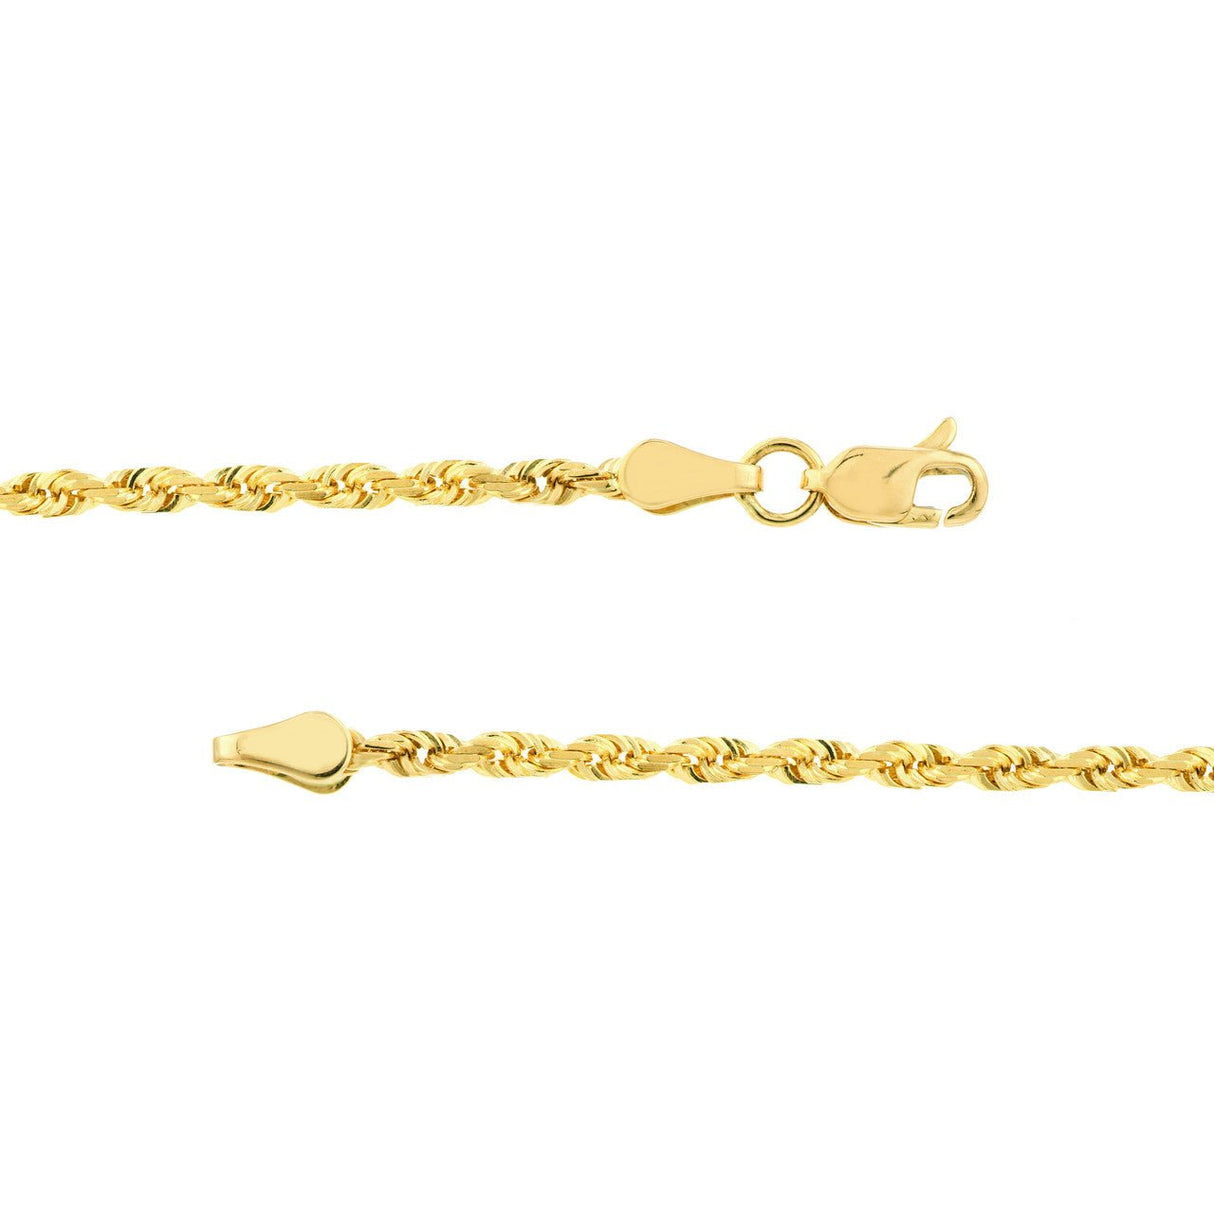 10K Gold Chain, 20", 2.3mm D/C Rope Chain with Lobster Lock, Gold Layered Chain, Gold Necklace, - Diamond Origin